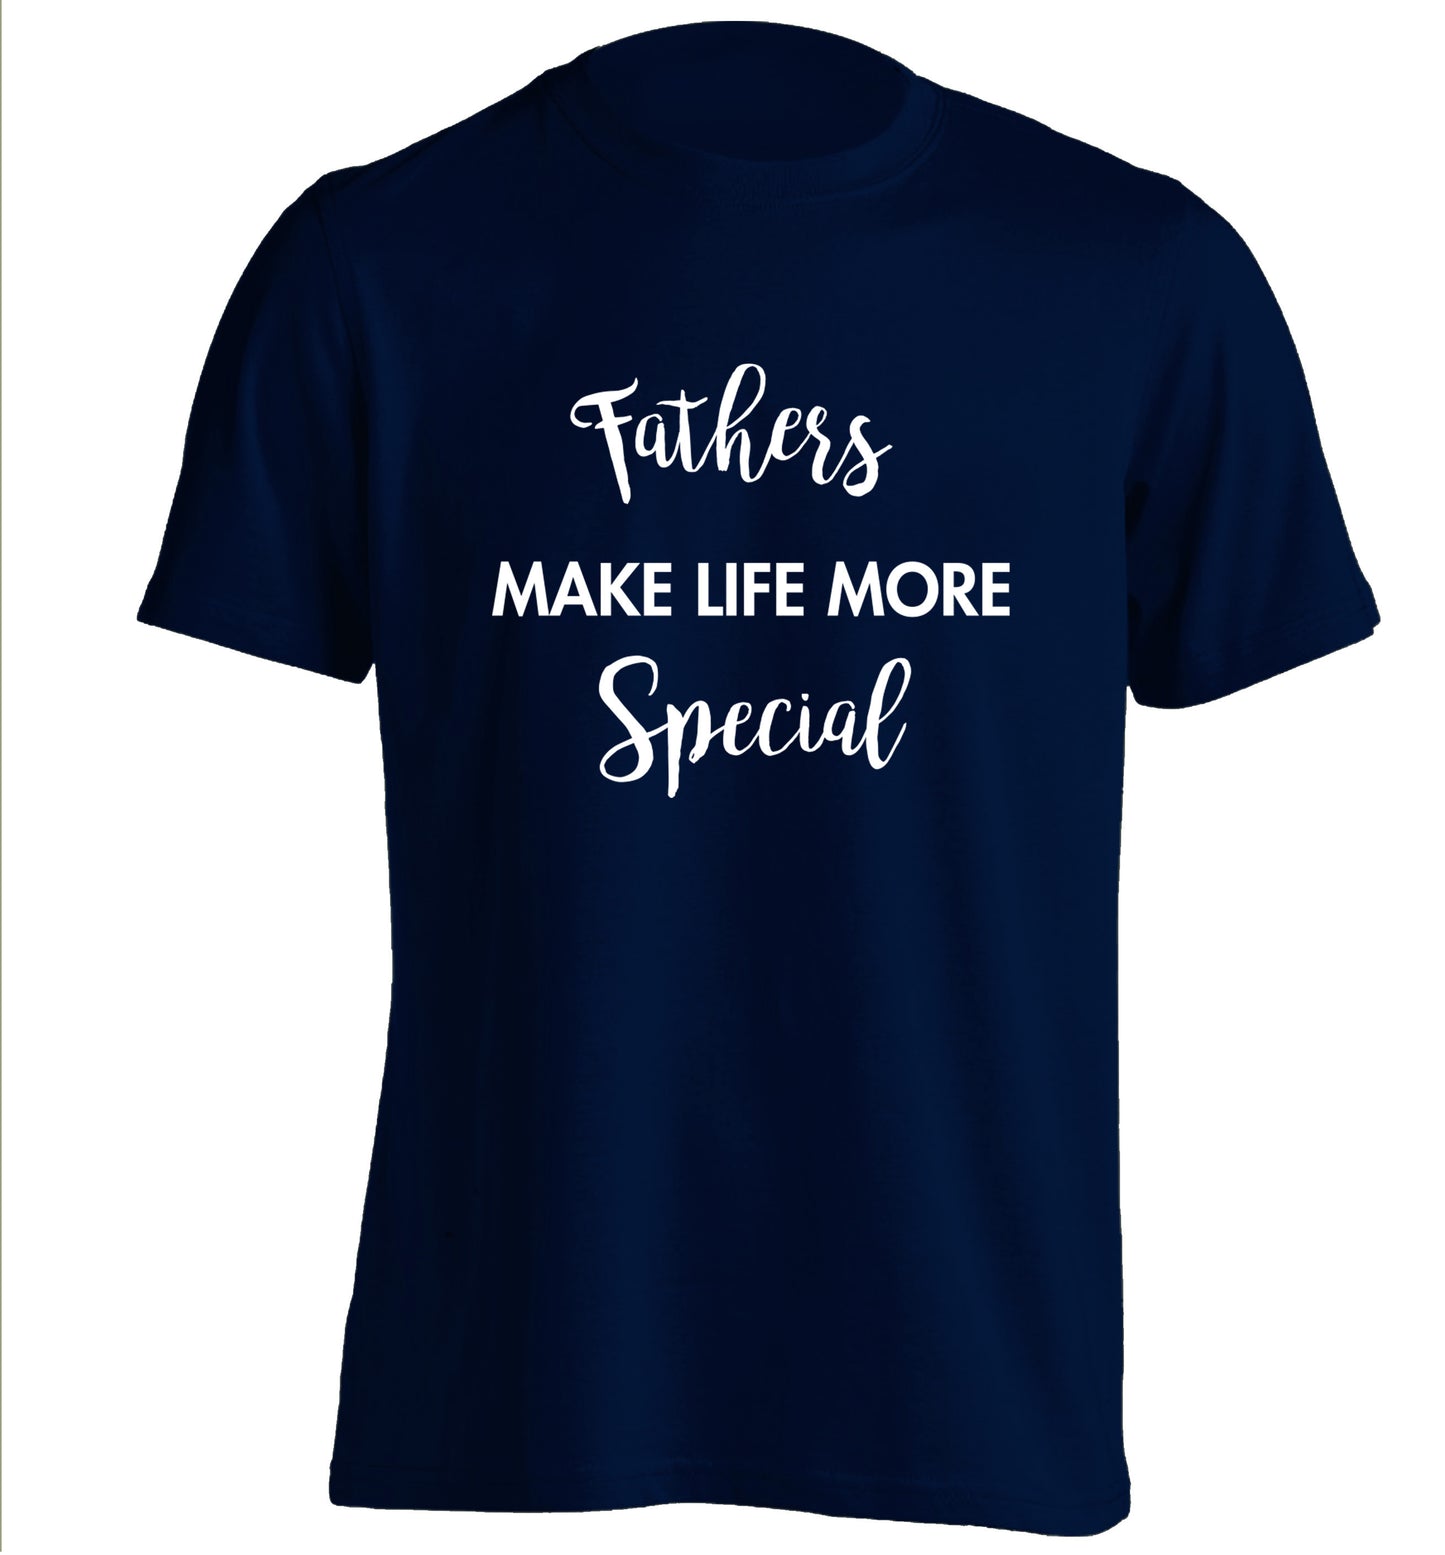 Fathers make life more special adults unisex navy Tshirt 2XL